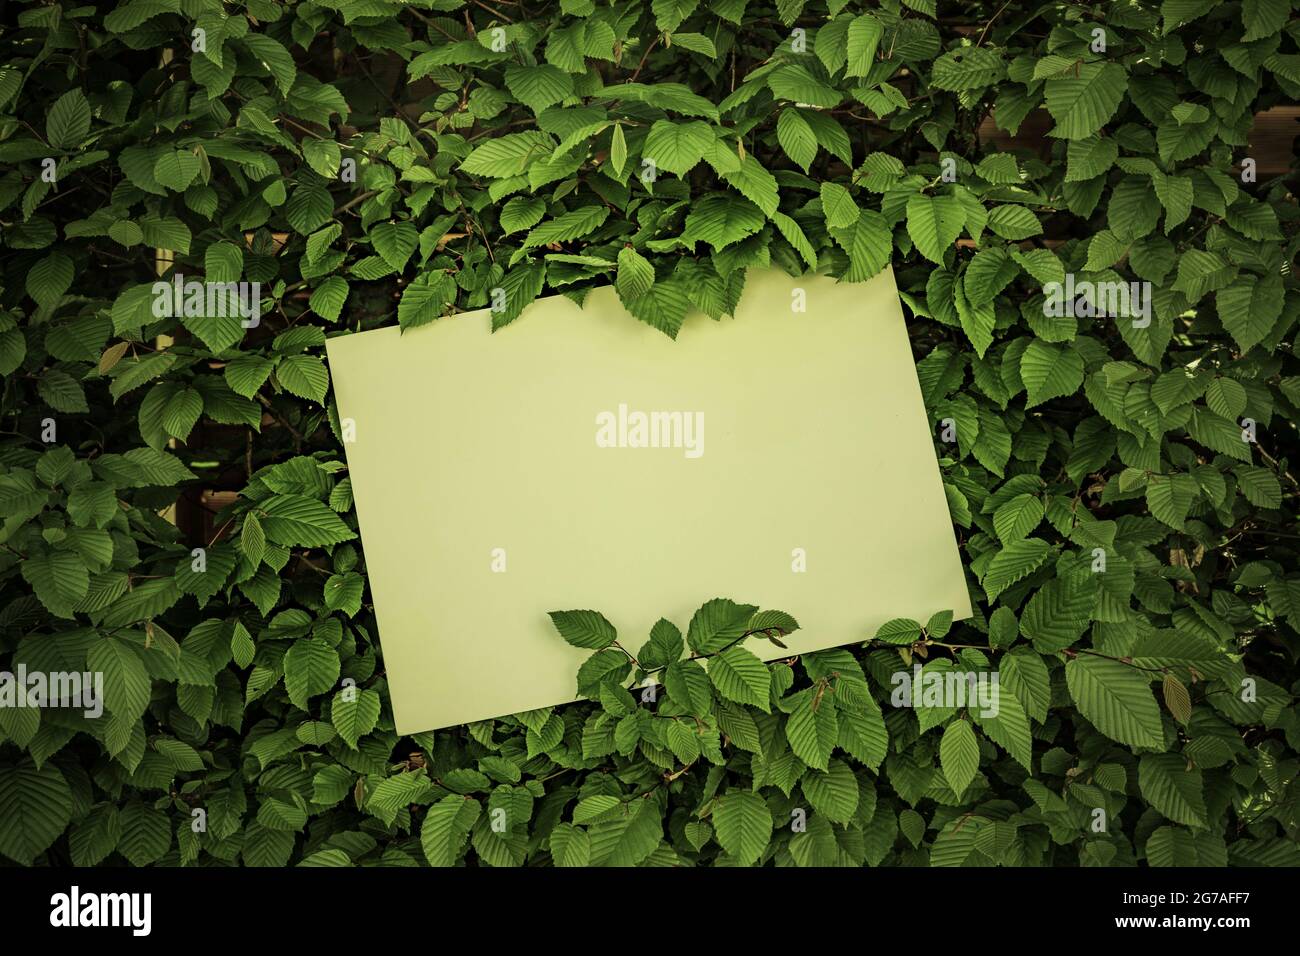 White sheet of paper in front of green leaves Stock Photo